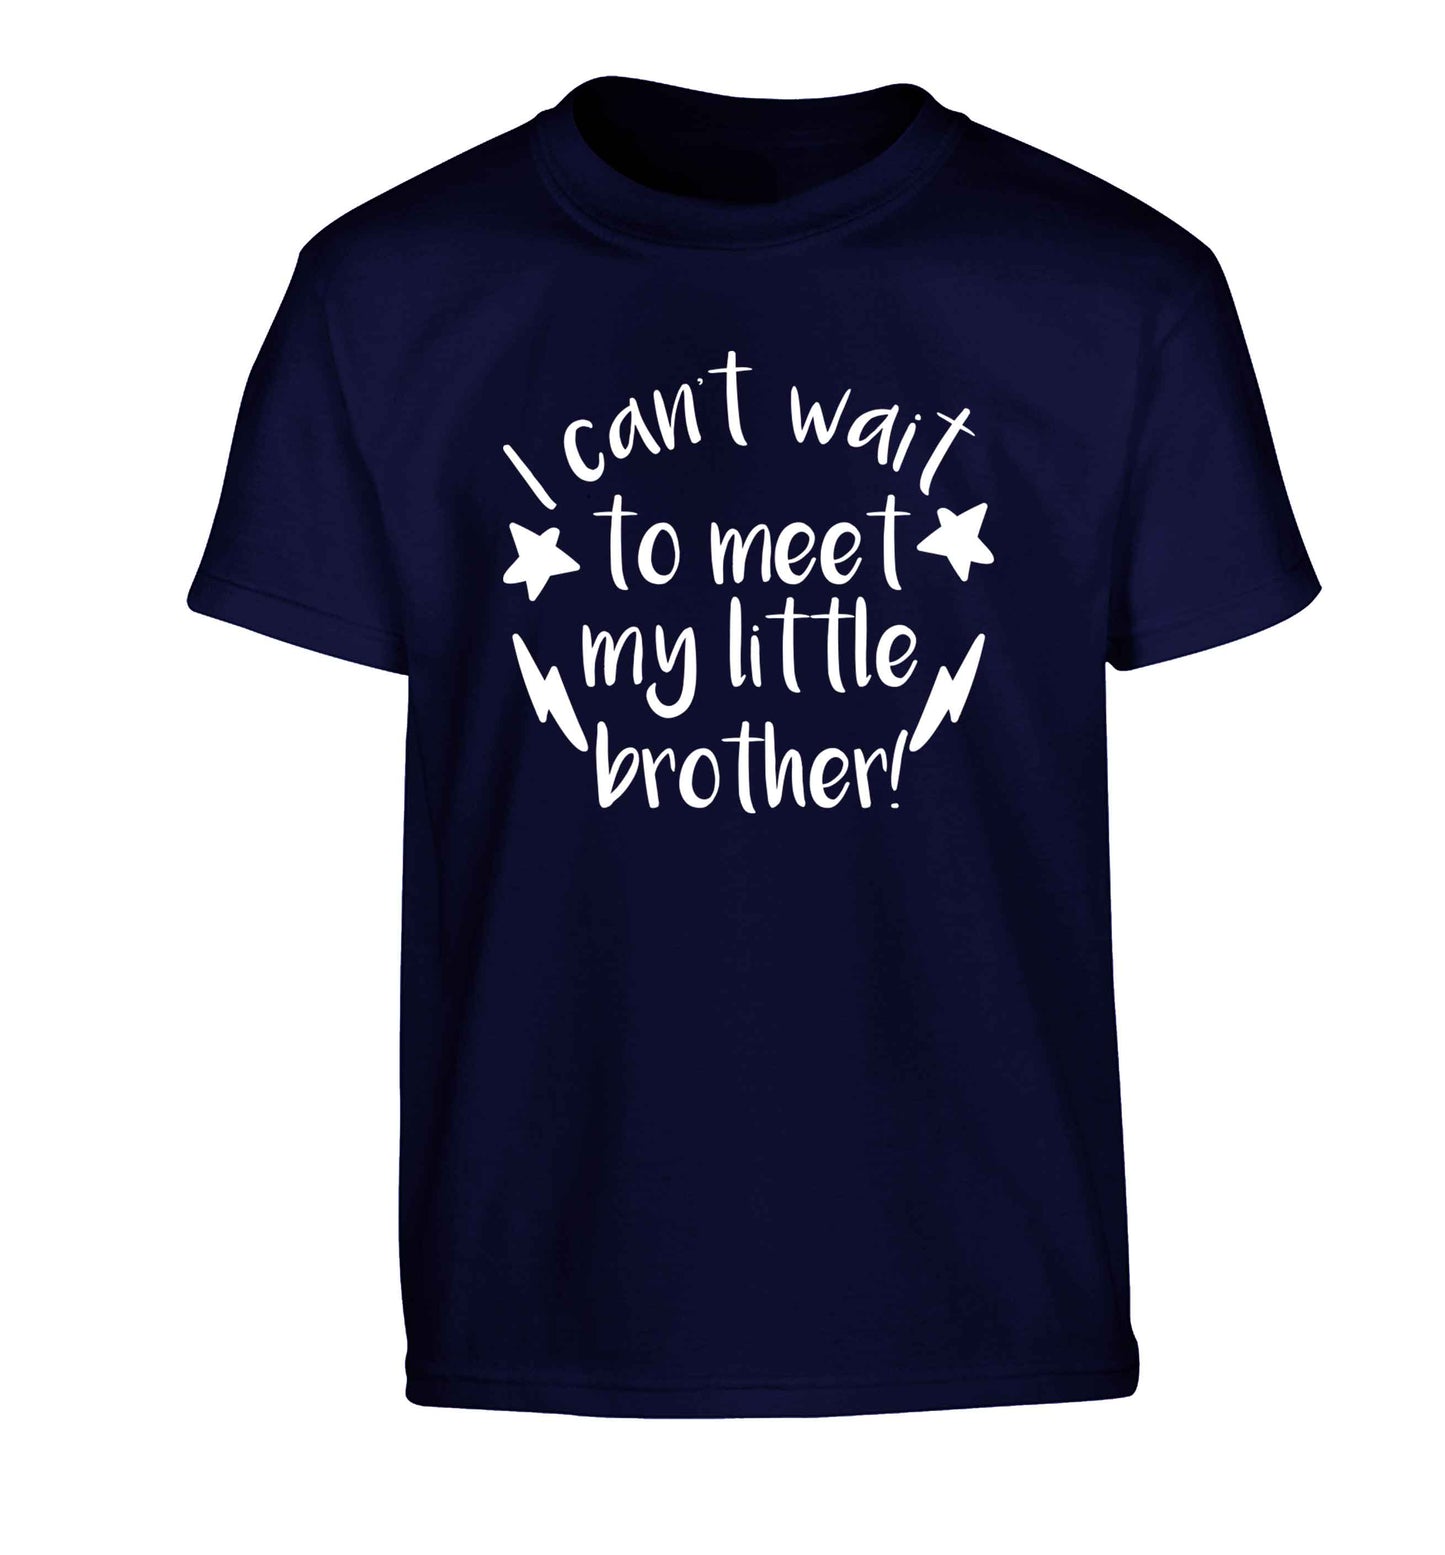 I can't wait to meet my sister! Children's navy Tshirt 12-13 Years